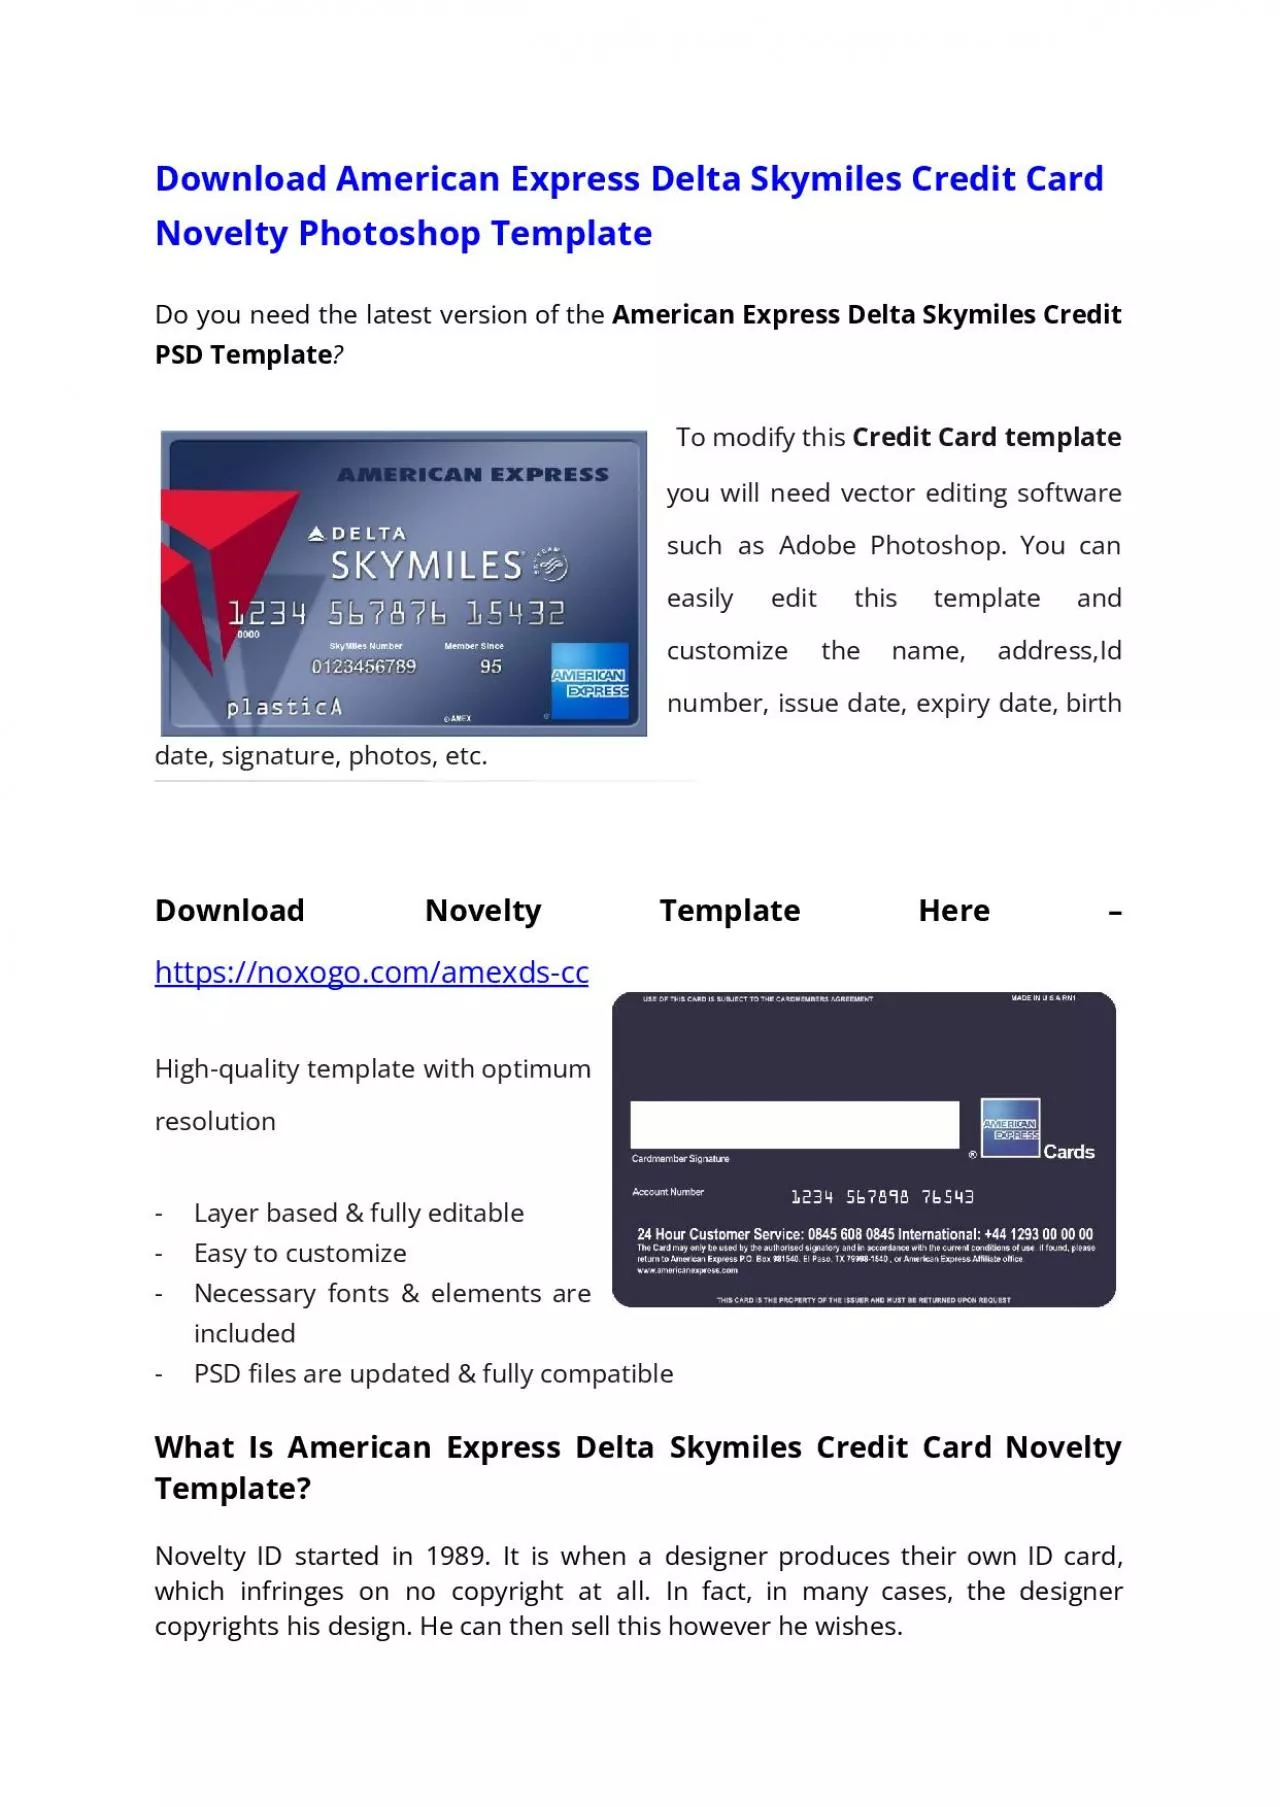 American Express Delta Skymiles Credit Card PSD Template – Download Photoshop File